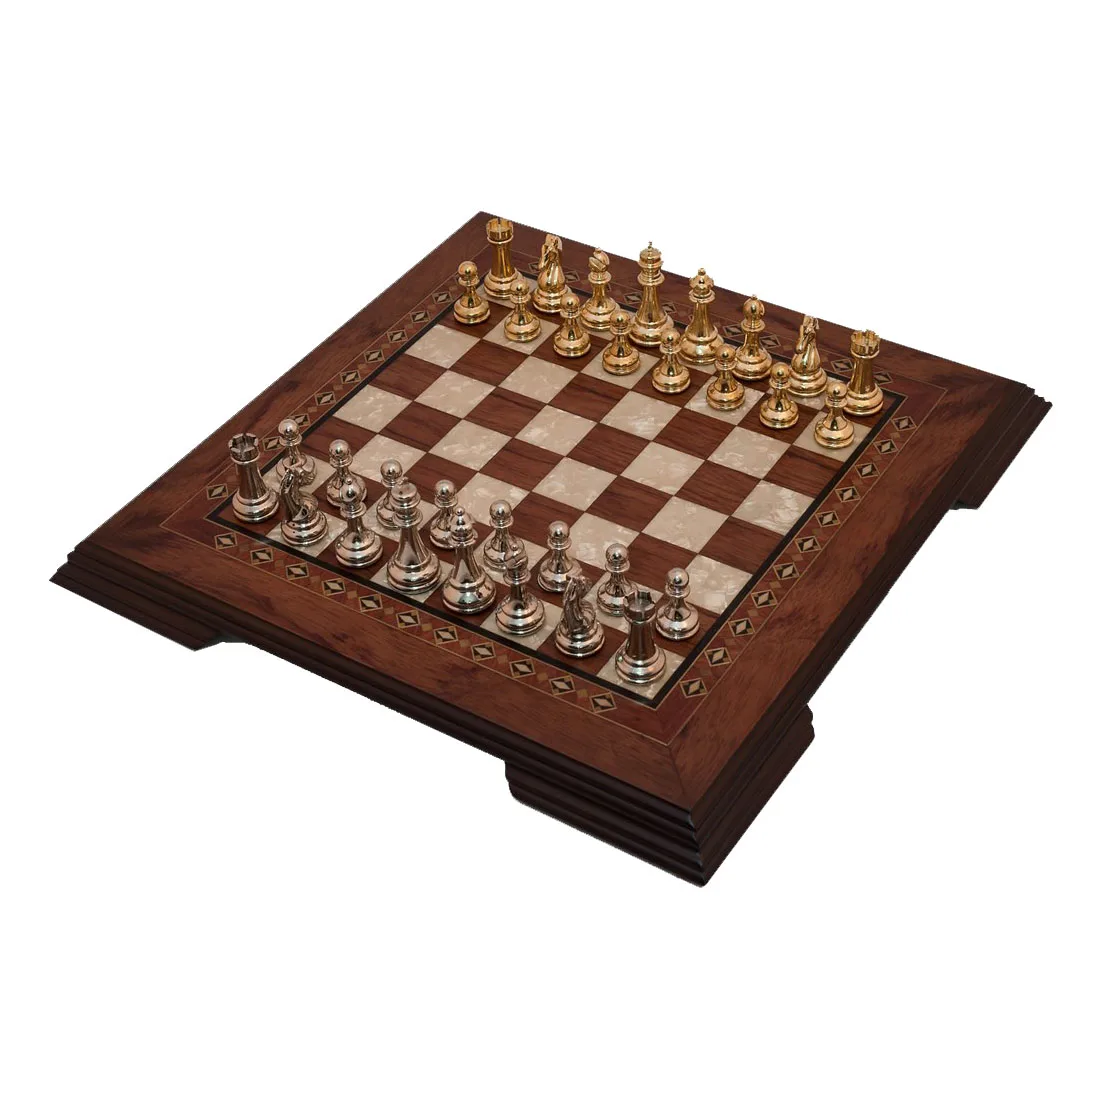 Solid Walnut Wood Chess Game Set - With Metal Figure - Footed Mosaic Engraved Chessboard Gift Items Шахматы шахматы практикум по тактике